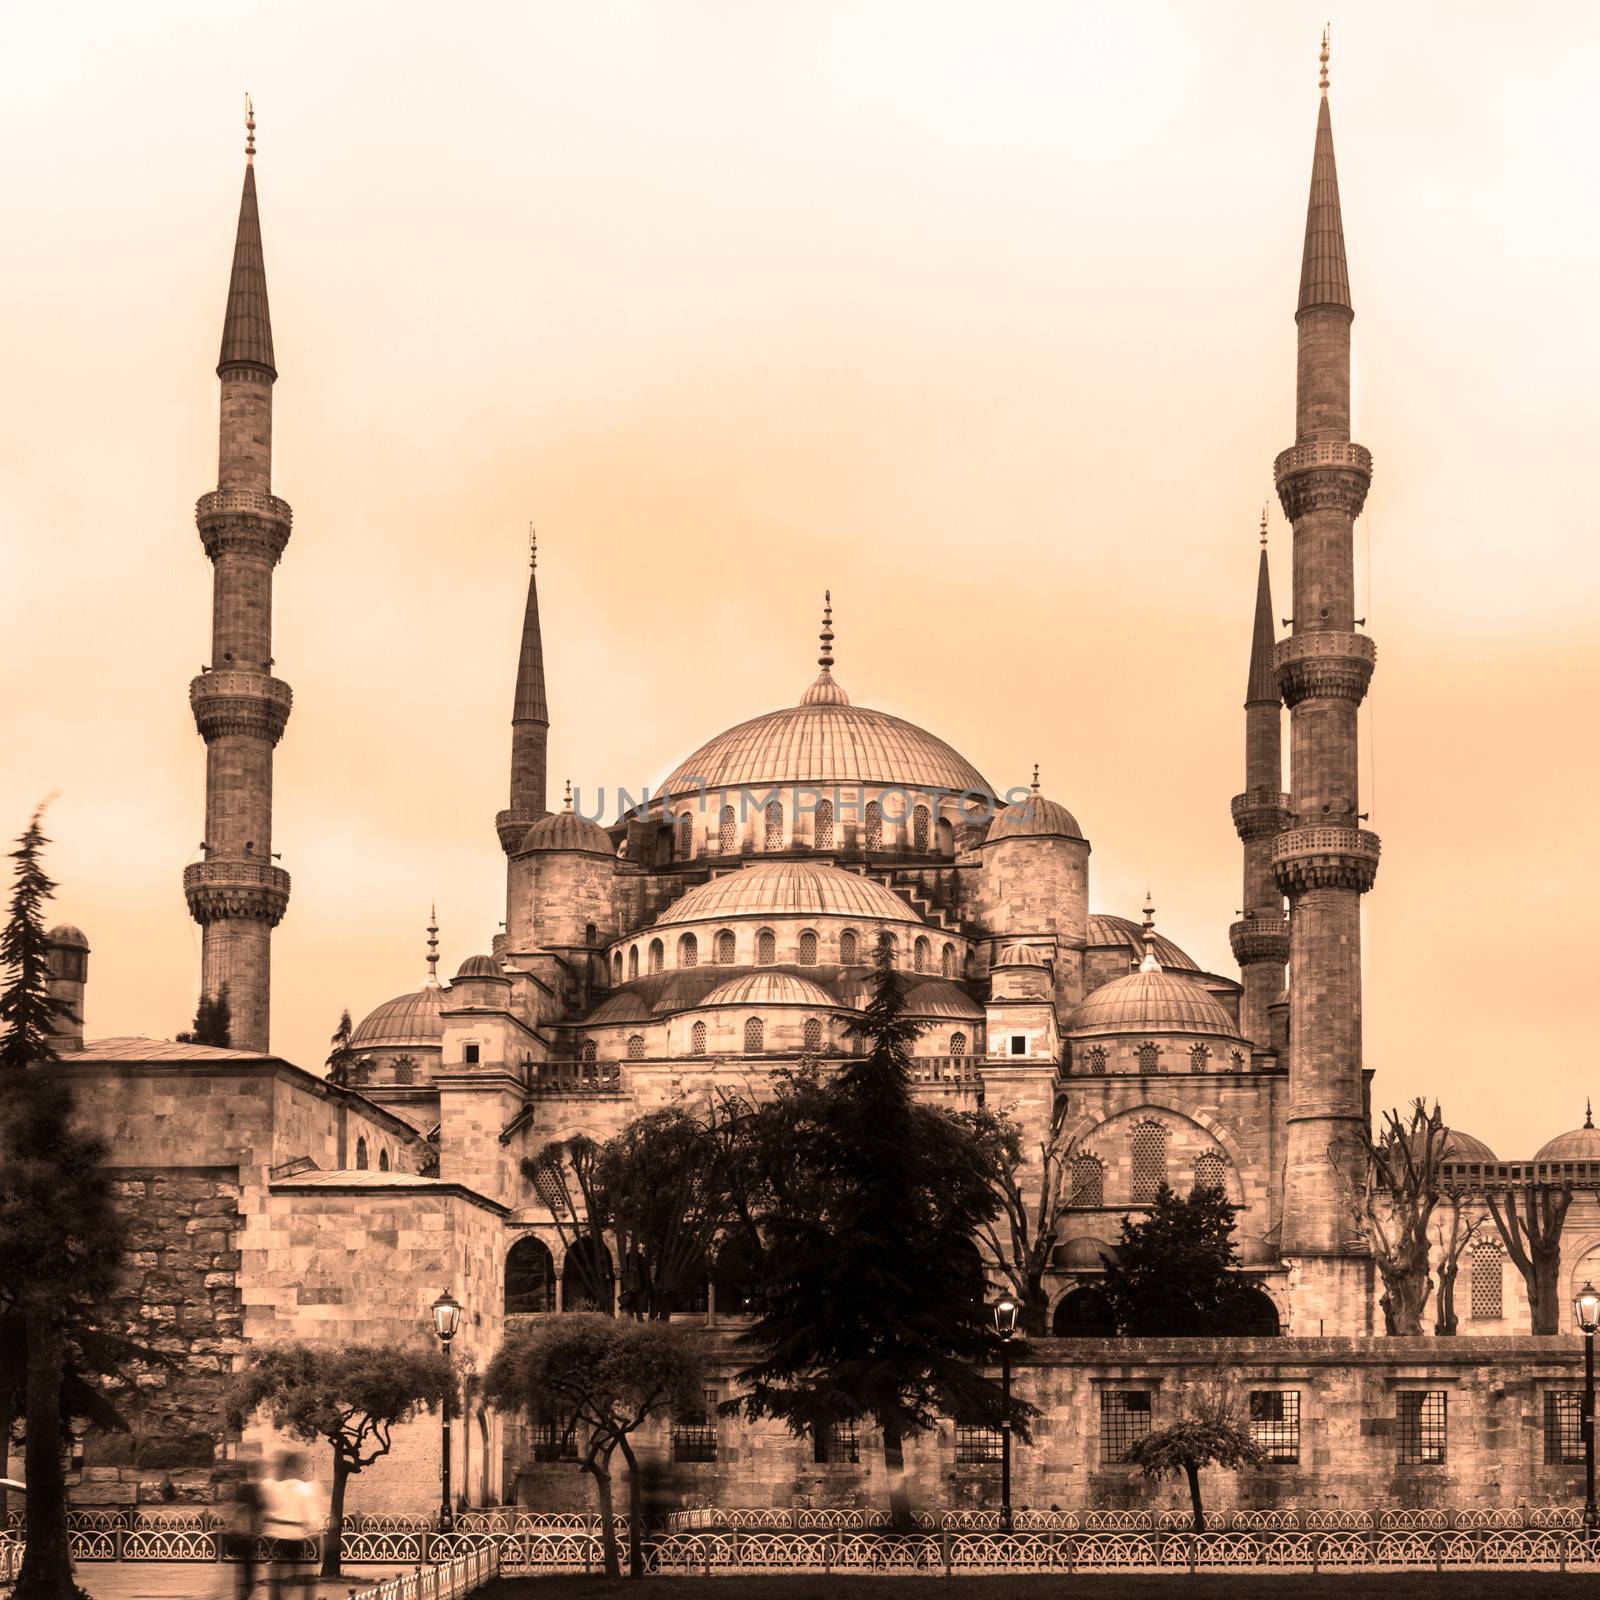 The Sultan Ahmed Mosque is an historic mosque in Istanbul. The mosque is popularly known as the Blue Mosque for the blue tiles adorning the walls of its interior.